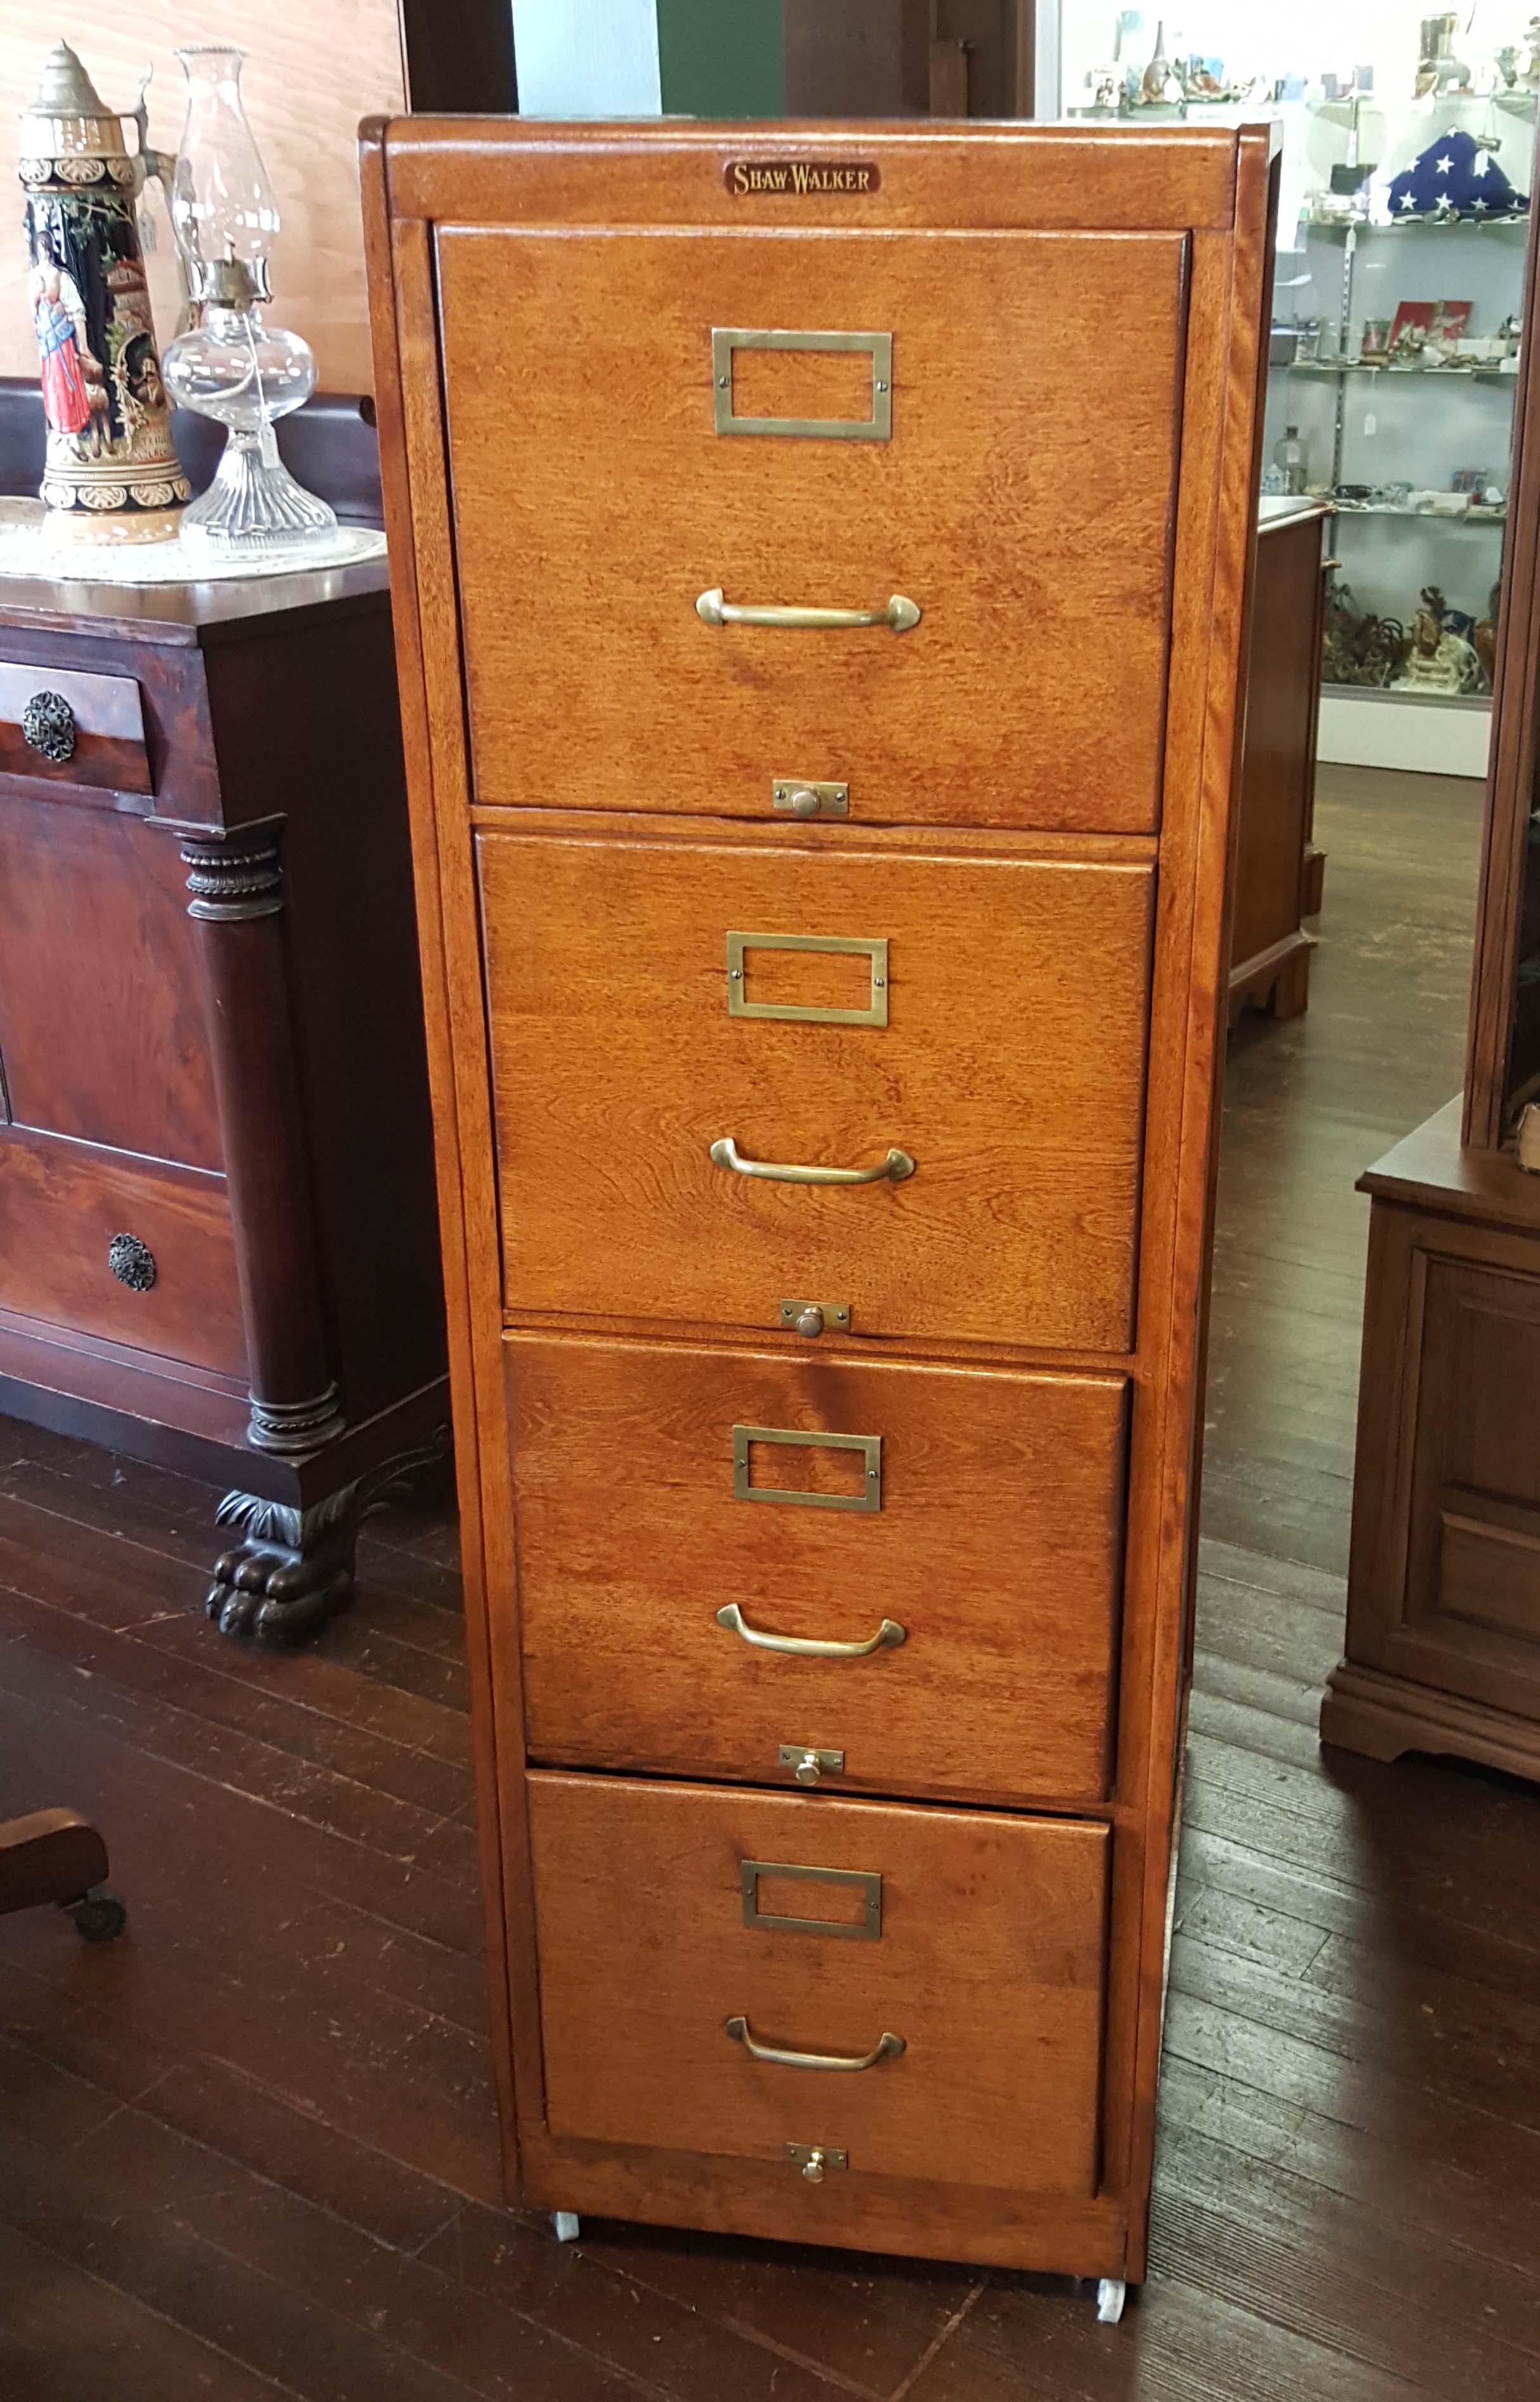 WOODEN FILE CABINET